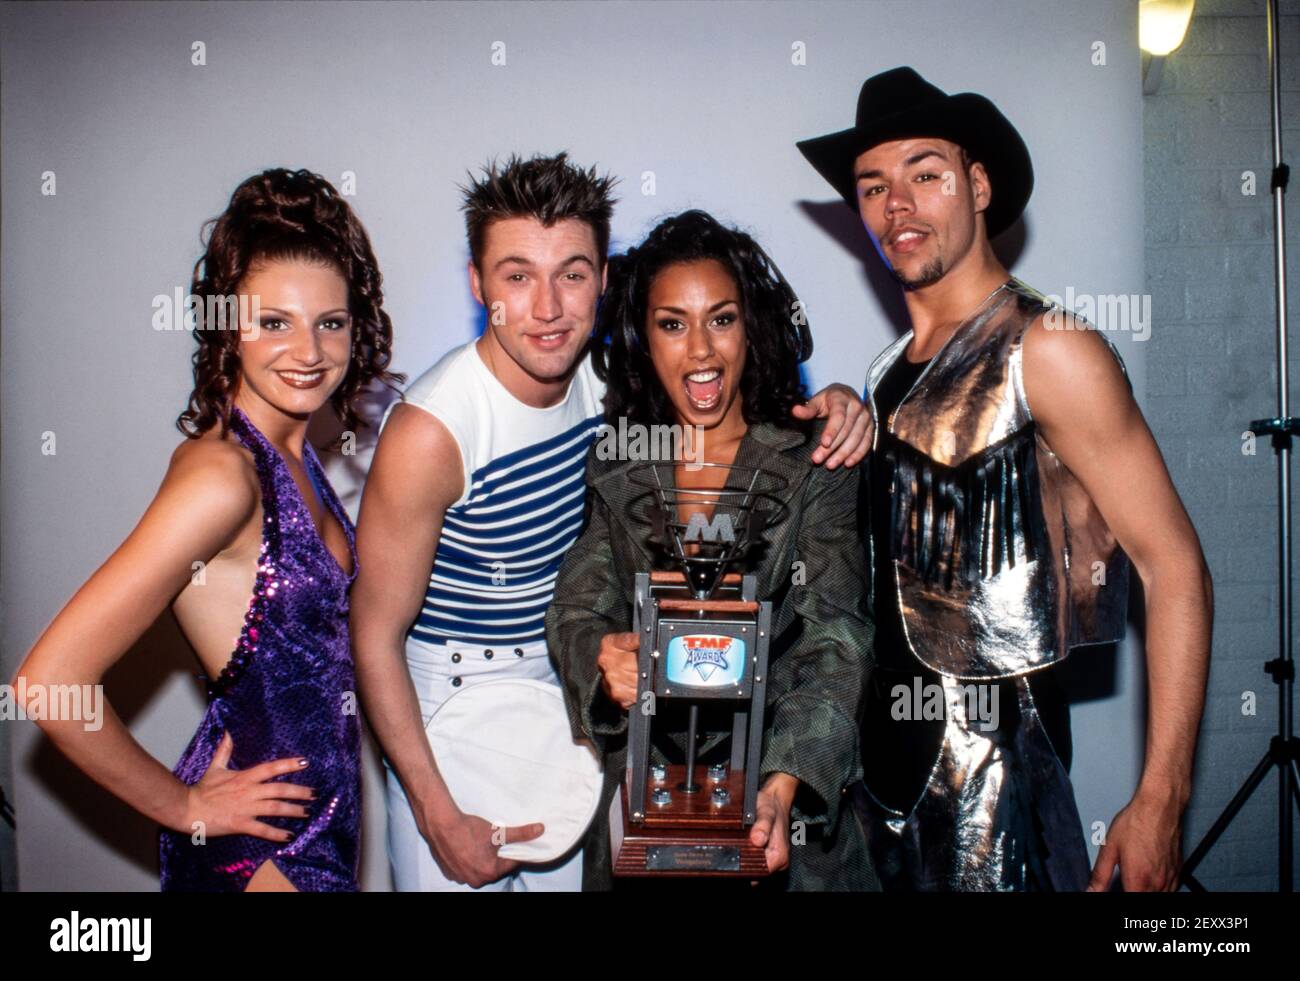 ROTTERDAM, THE NETHERLANDS - 03 NOV, 1999: The Vengaboys with the dutch TMF award for best dance act of the year. Stock Photo